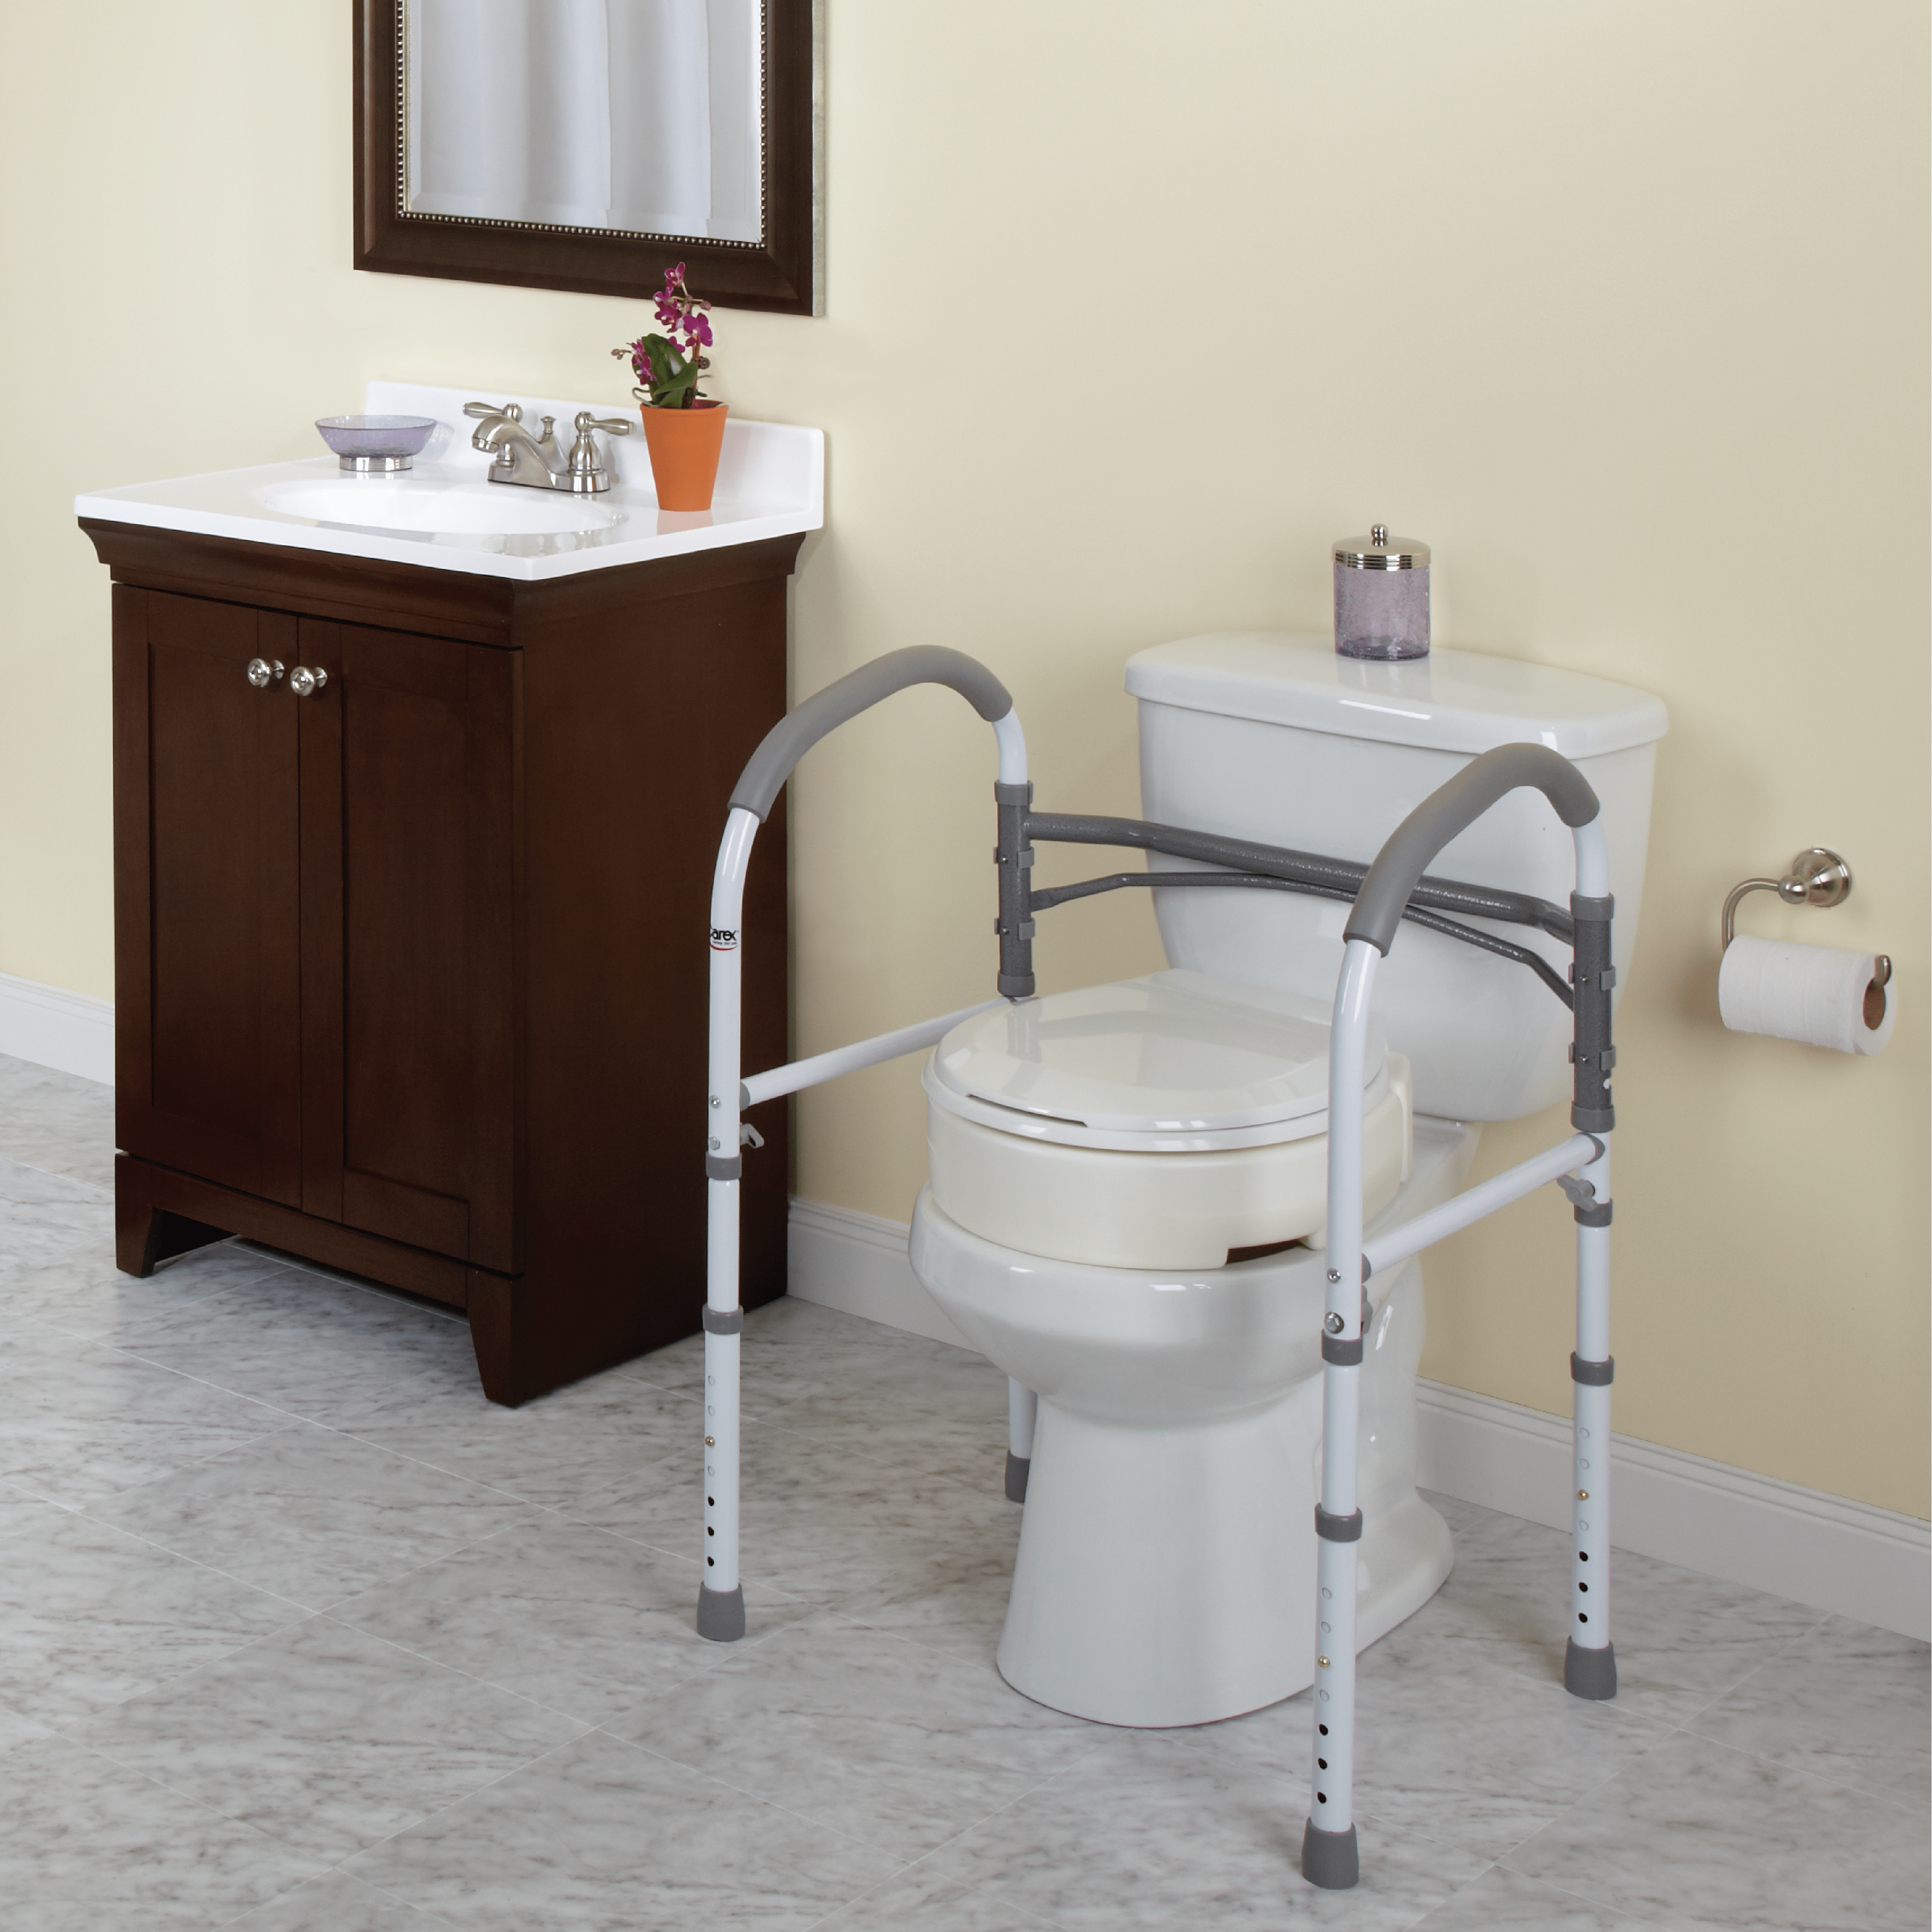 The Ultimate Padded Seat Raised Toilet Frame : Bathroom Aid with